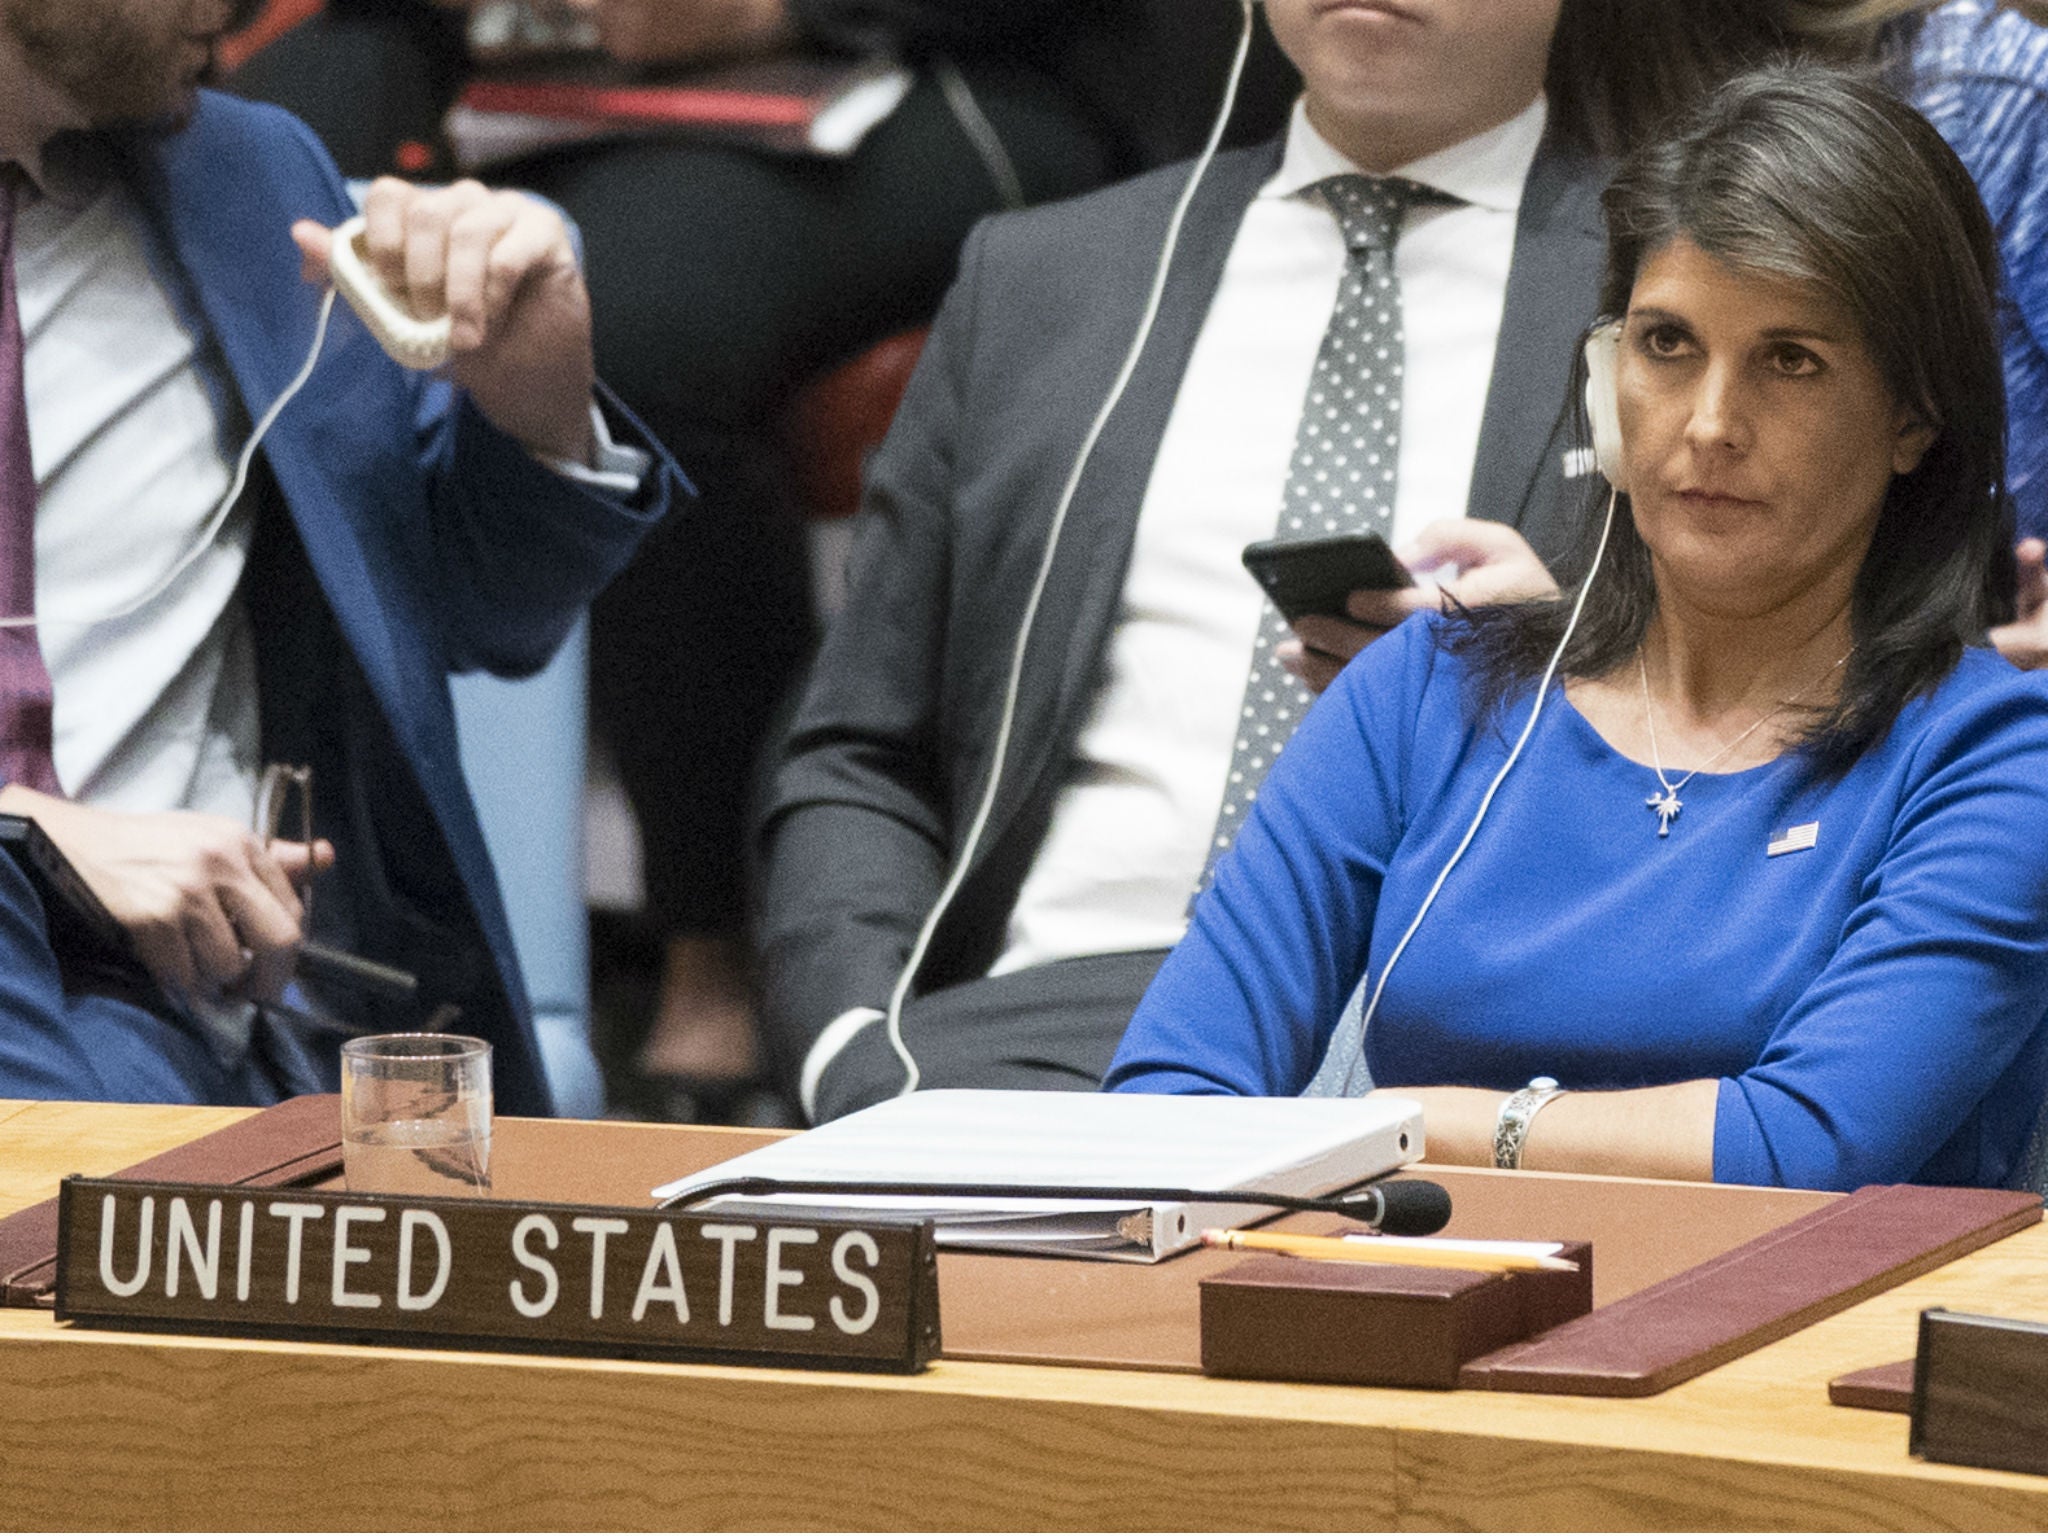 American Ambassador to the United Nations Nikki Haley listens during a Security Council meeting on the situation in Syria United Nations headquarters